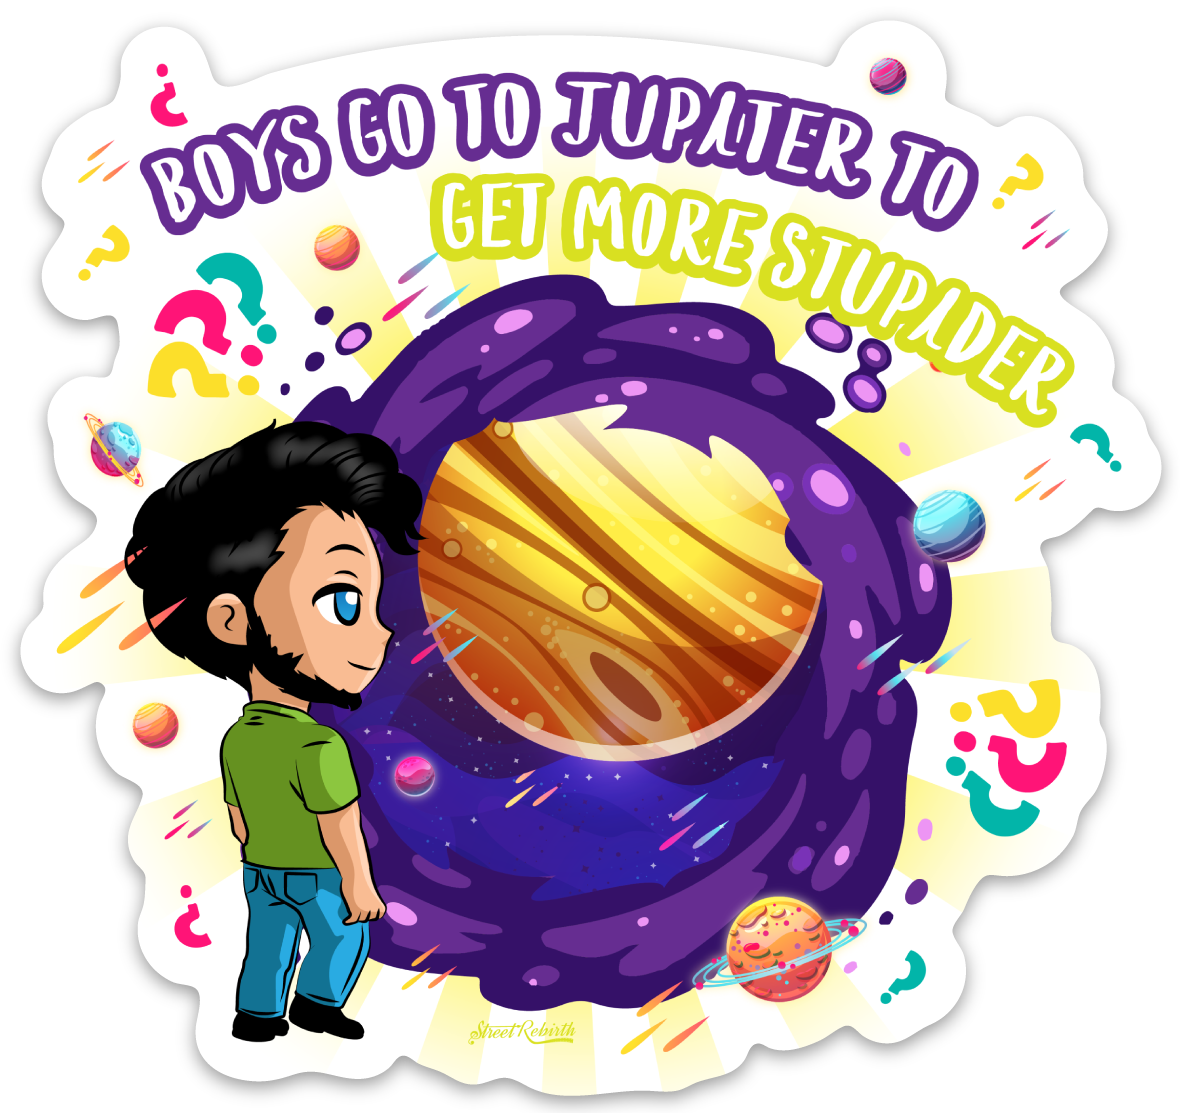 BOYS GO TO JUPITER TO GET MORE STUPIDER PUN STICKER – ONE 4 INCH WATER PROOF VINYL STICKER – FOR HYDRO FLASK, SKATEBOARD, LAPTOP, PLANNER, CAR, COLLECTING, GIFTING